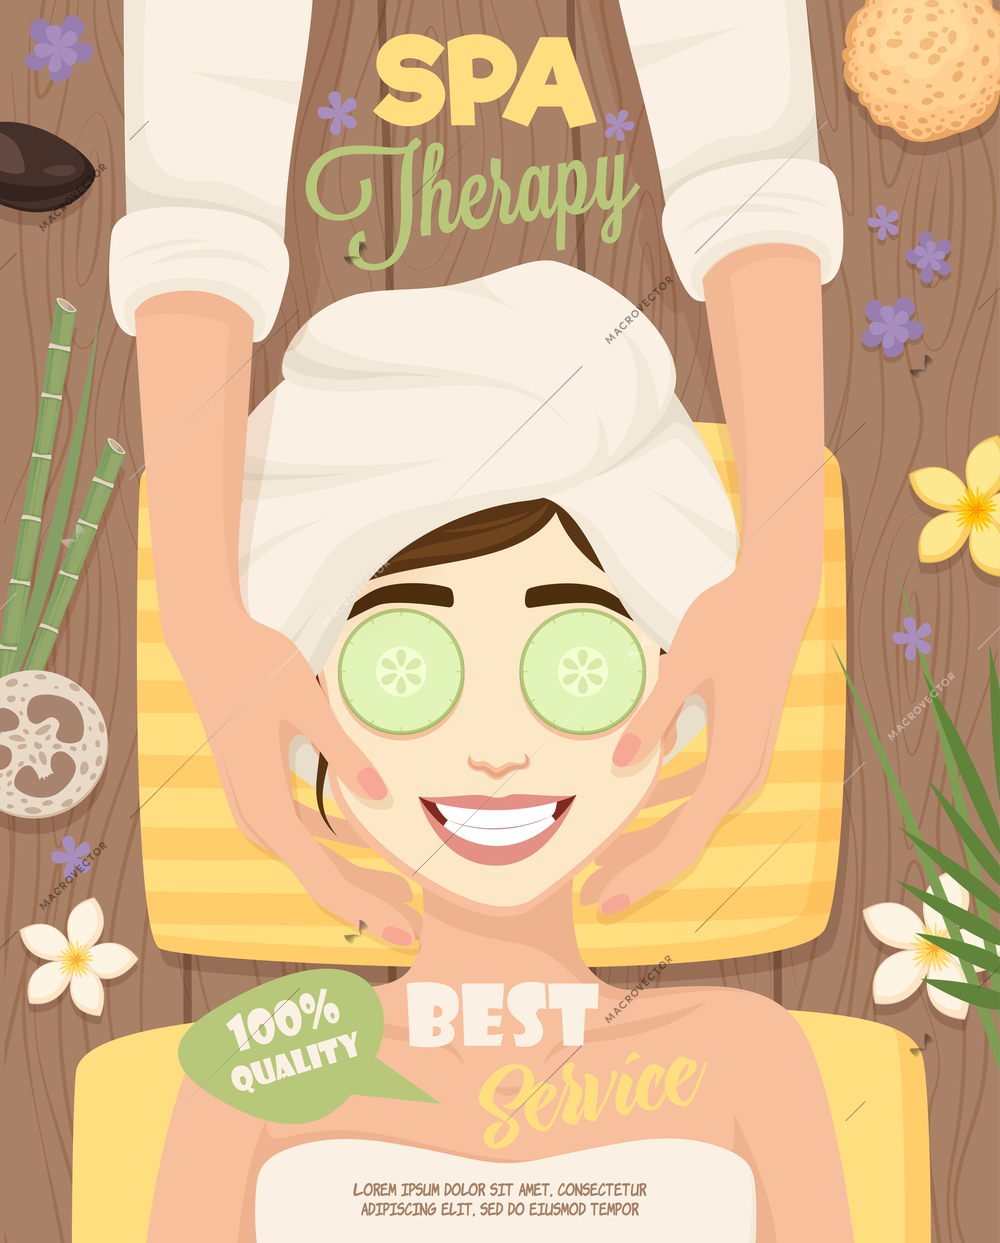 Skincare routine poster with happy cartoon woman character during aesthetic facial procedures with decorative flower elements vector illustration